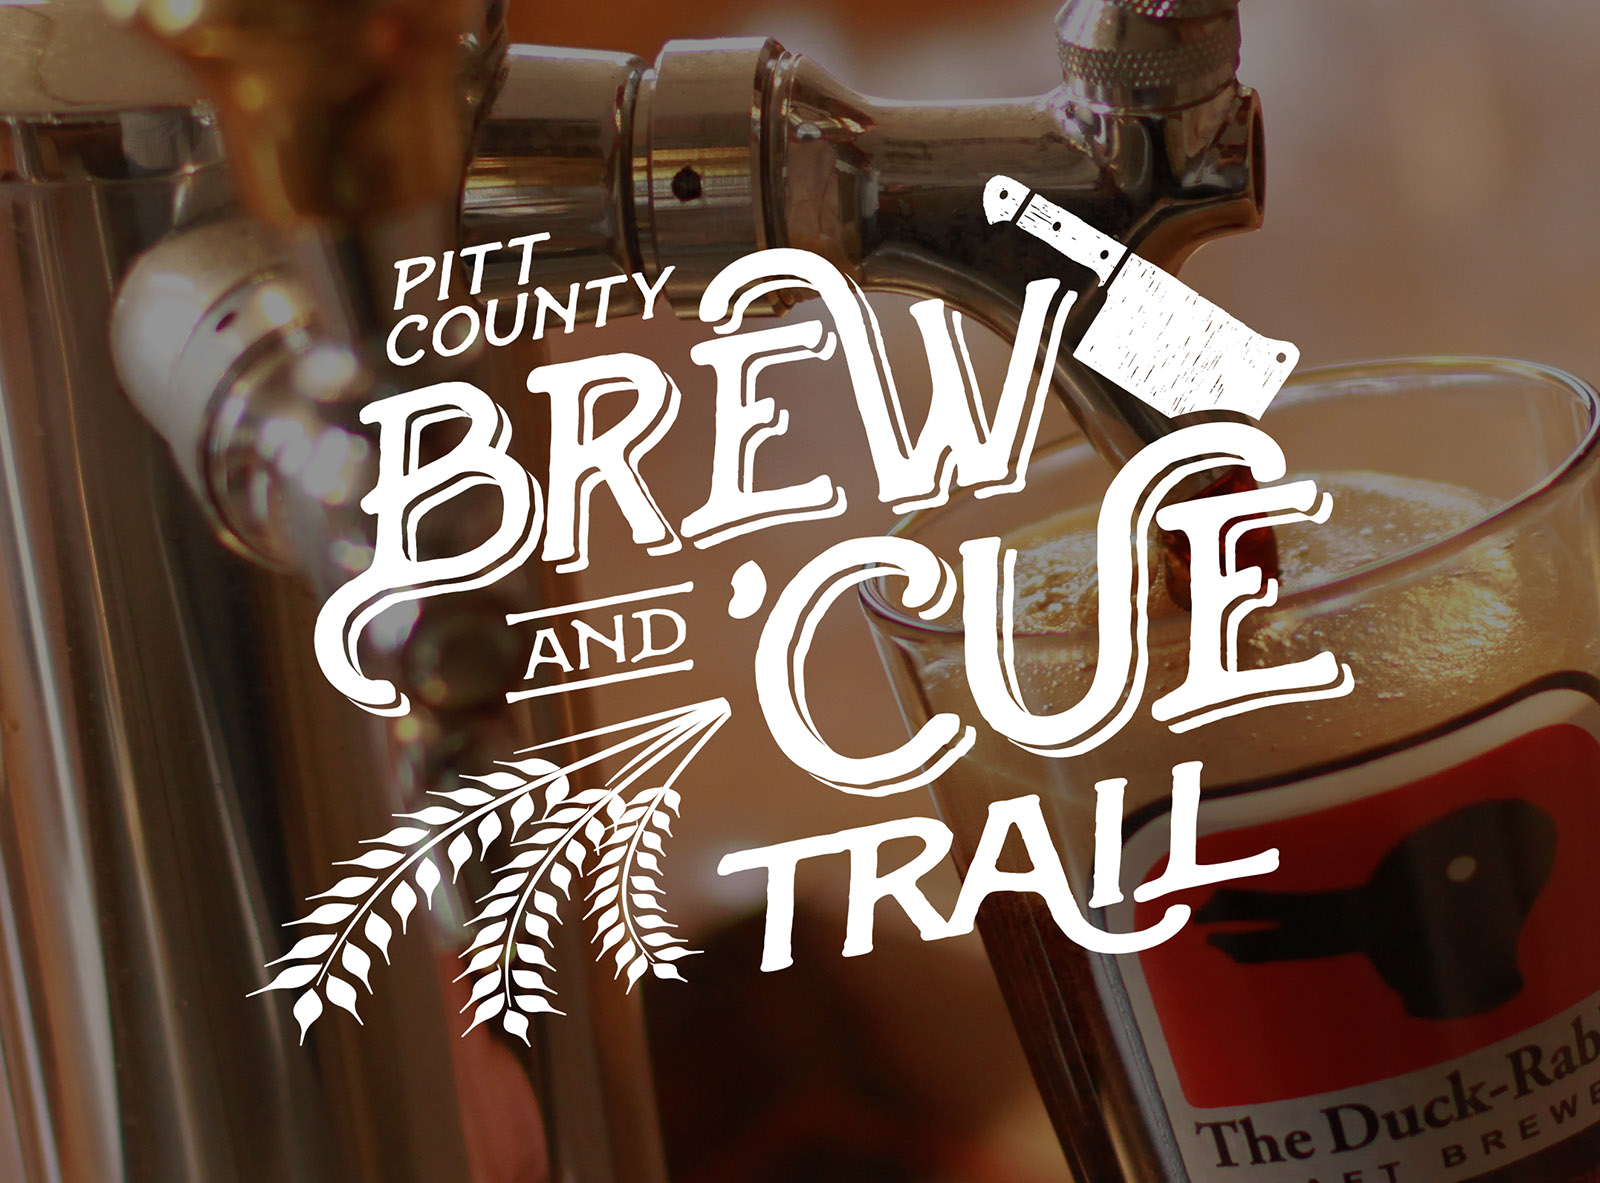 Pitt County Brew and 'Cue Trail logo